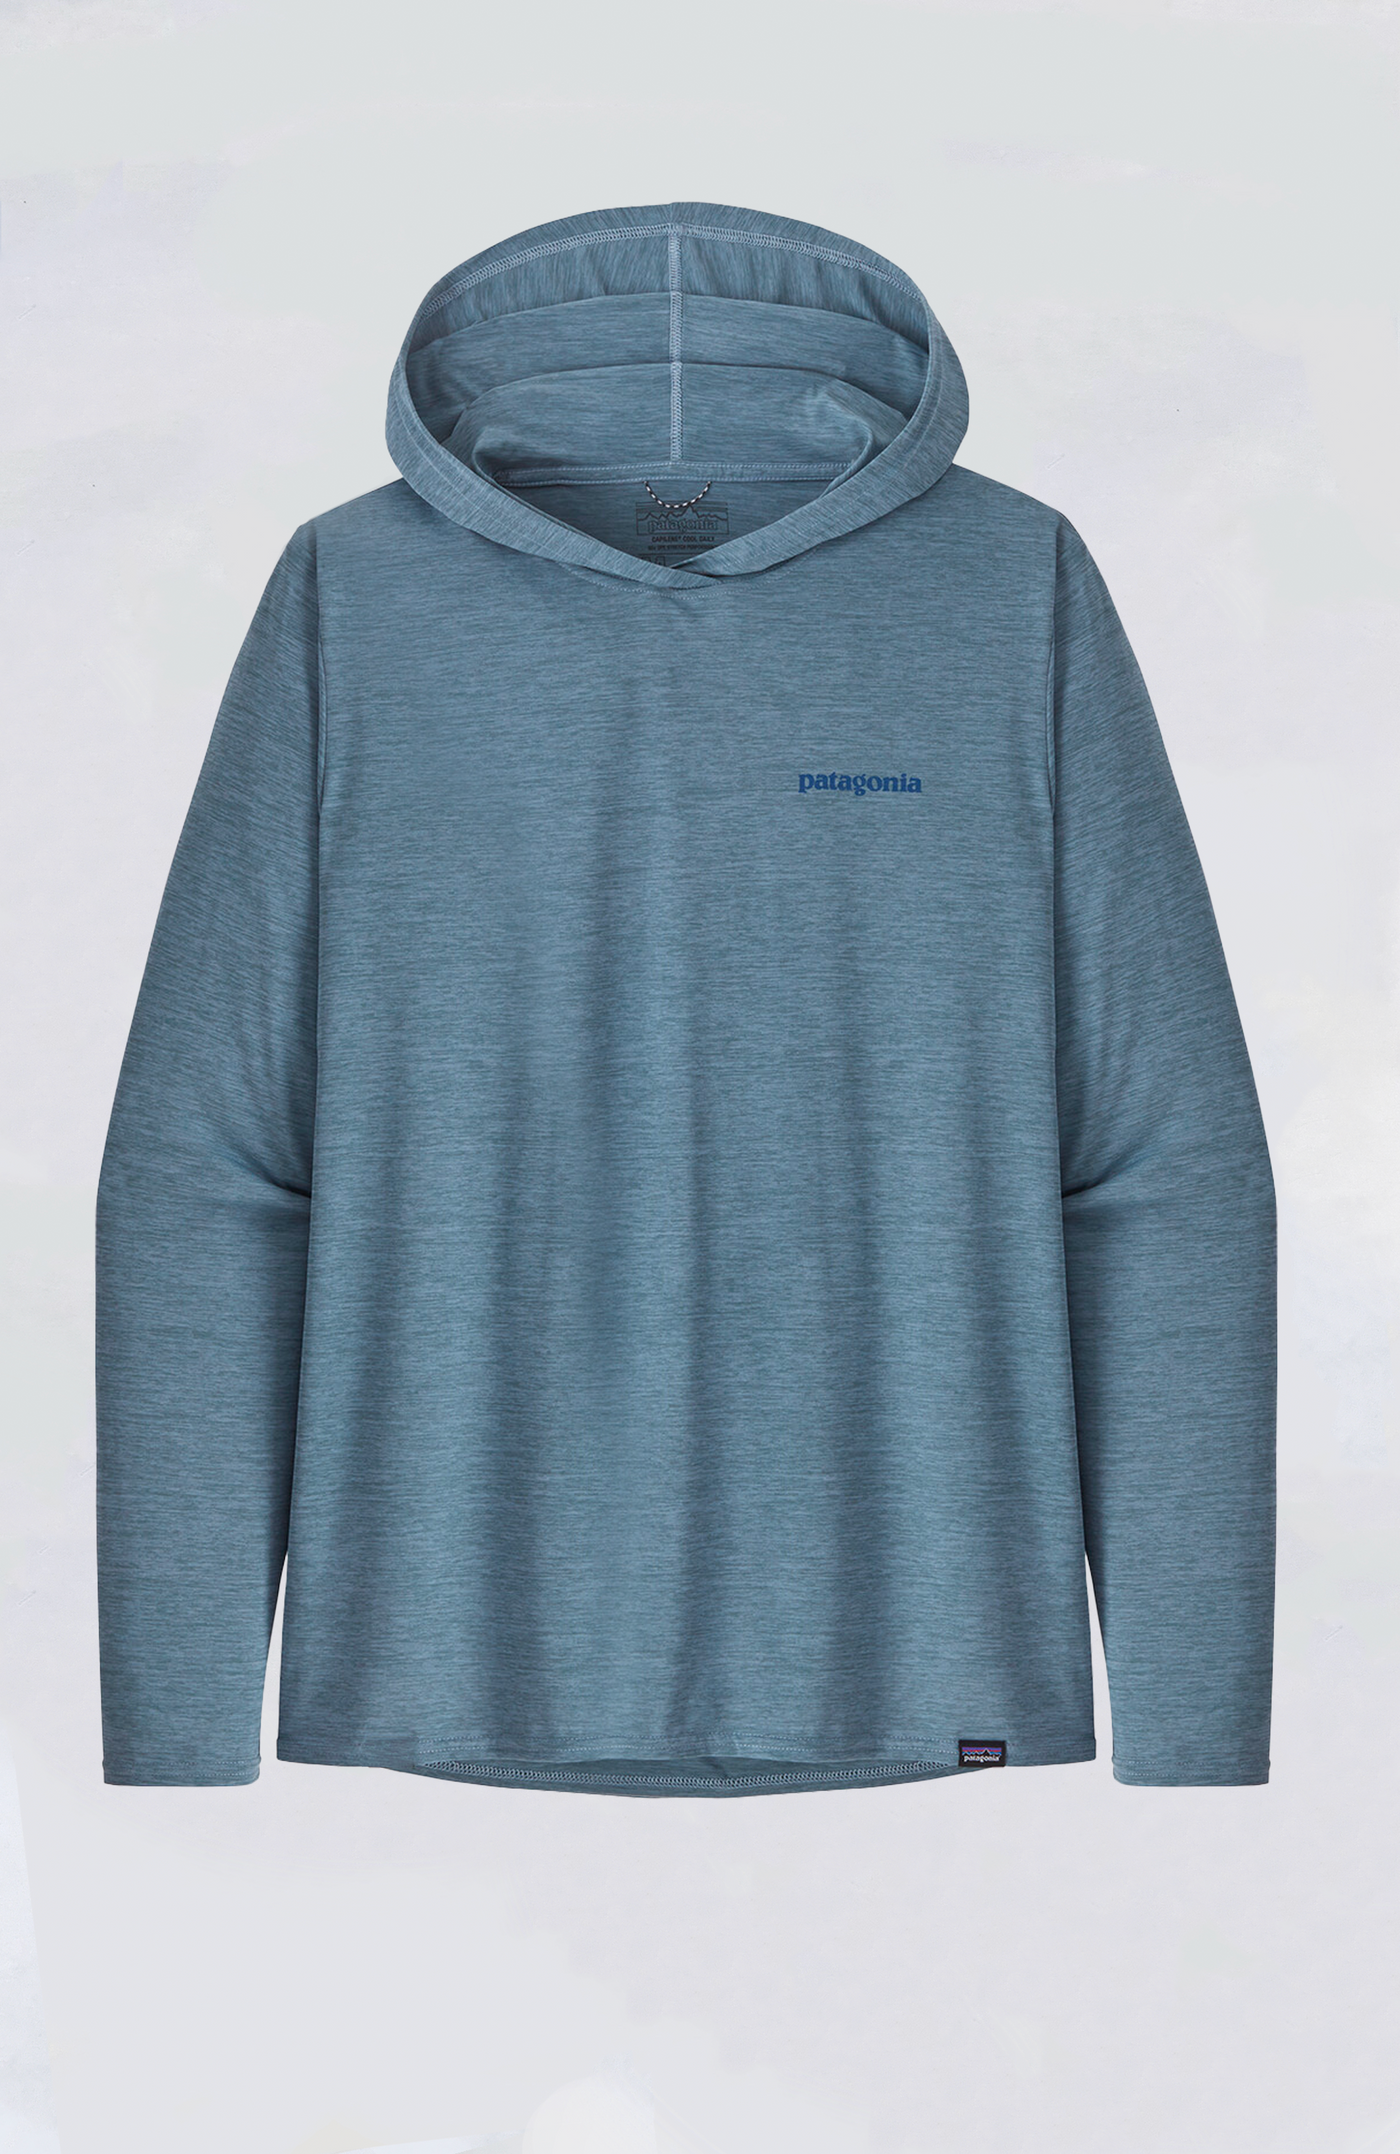 Patagonia Long Sleeve Tee - M's Cap Cool Daily Graphic Hoody